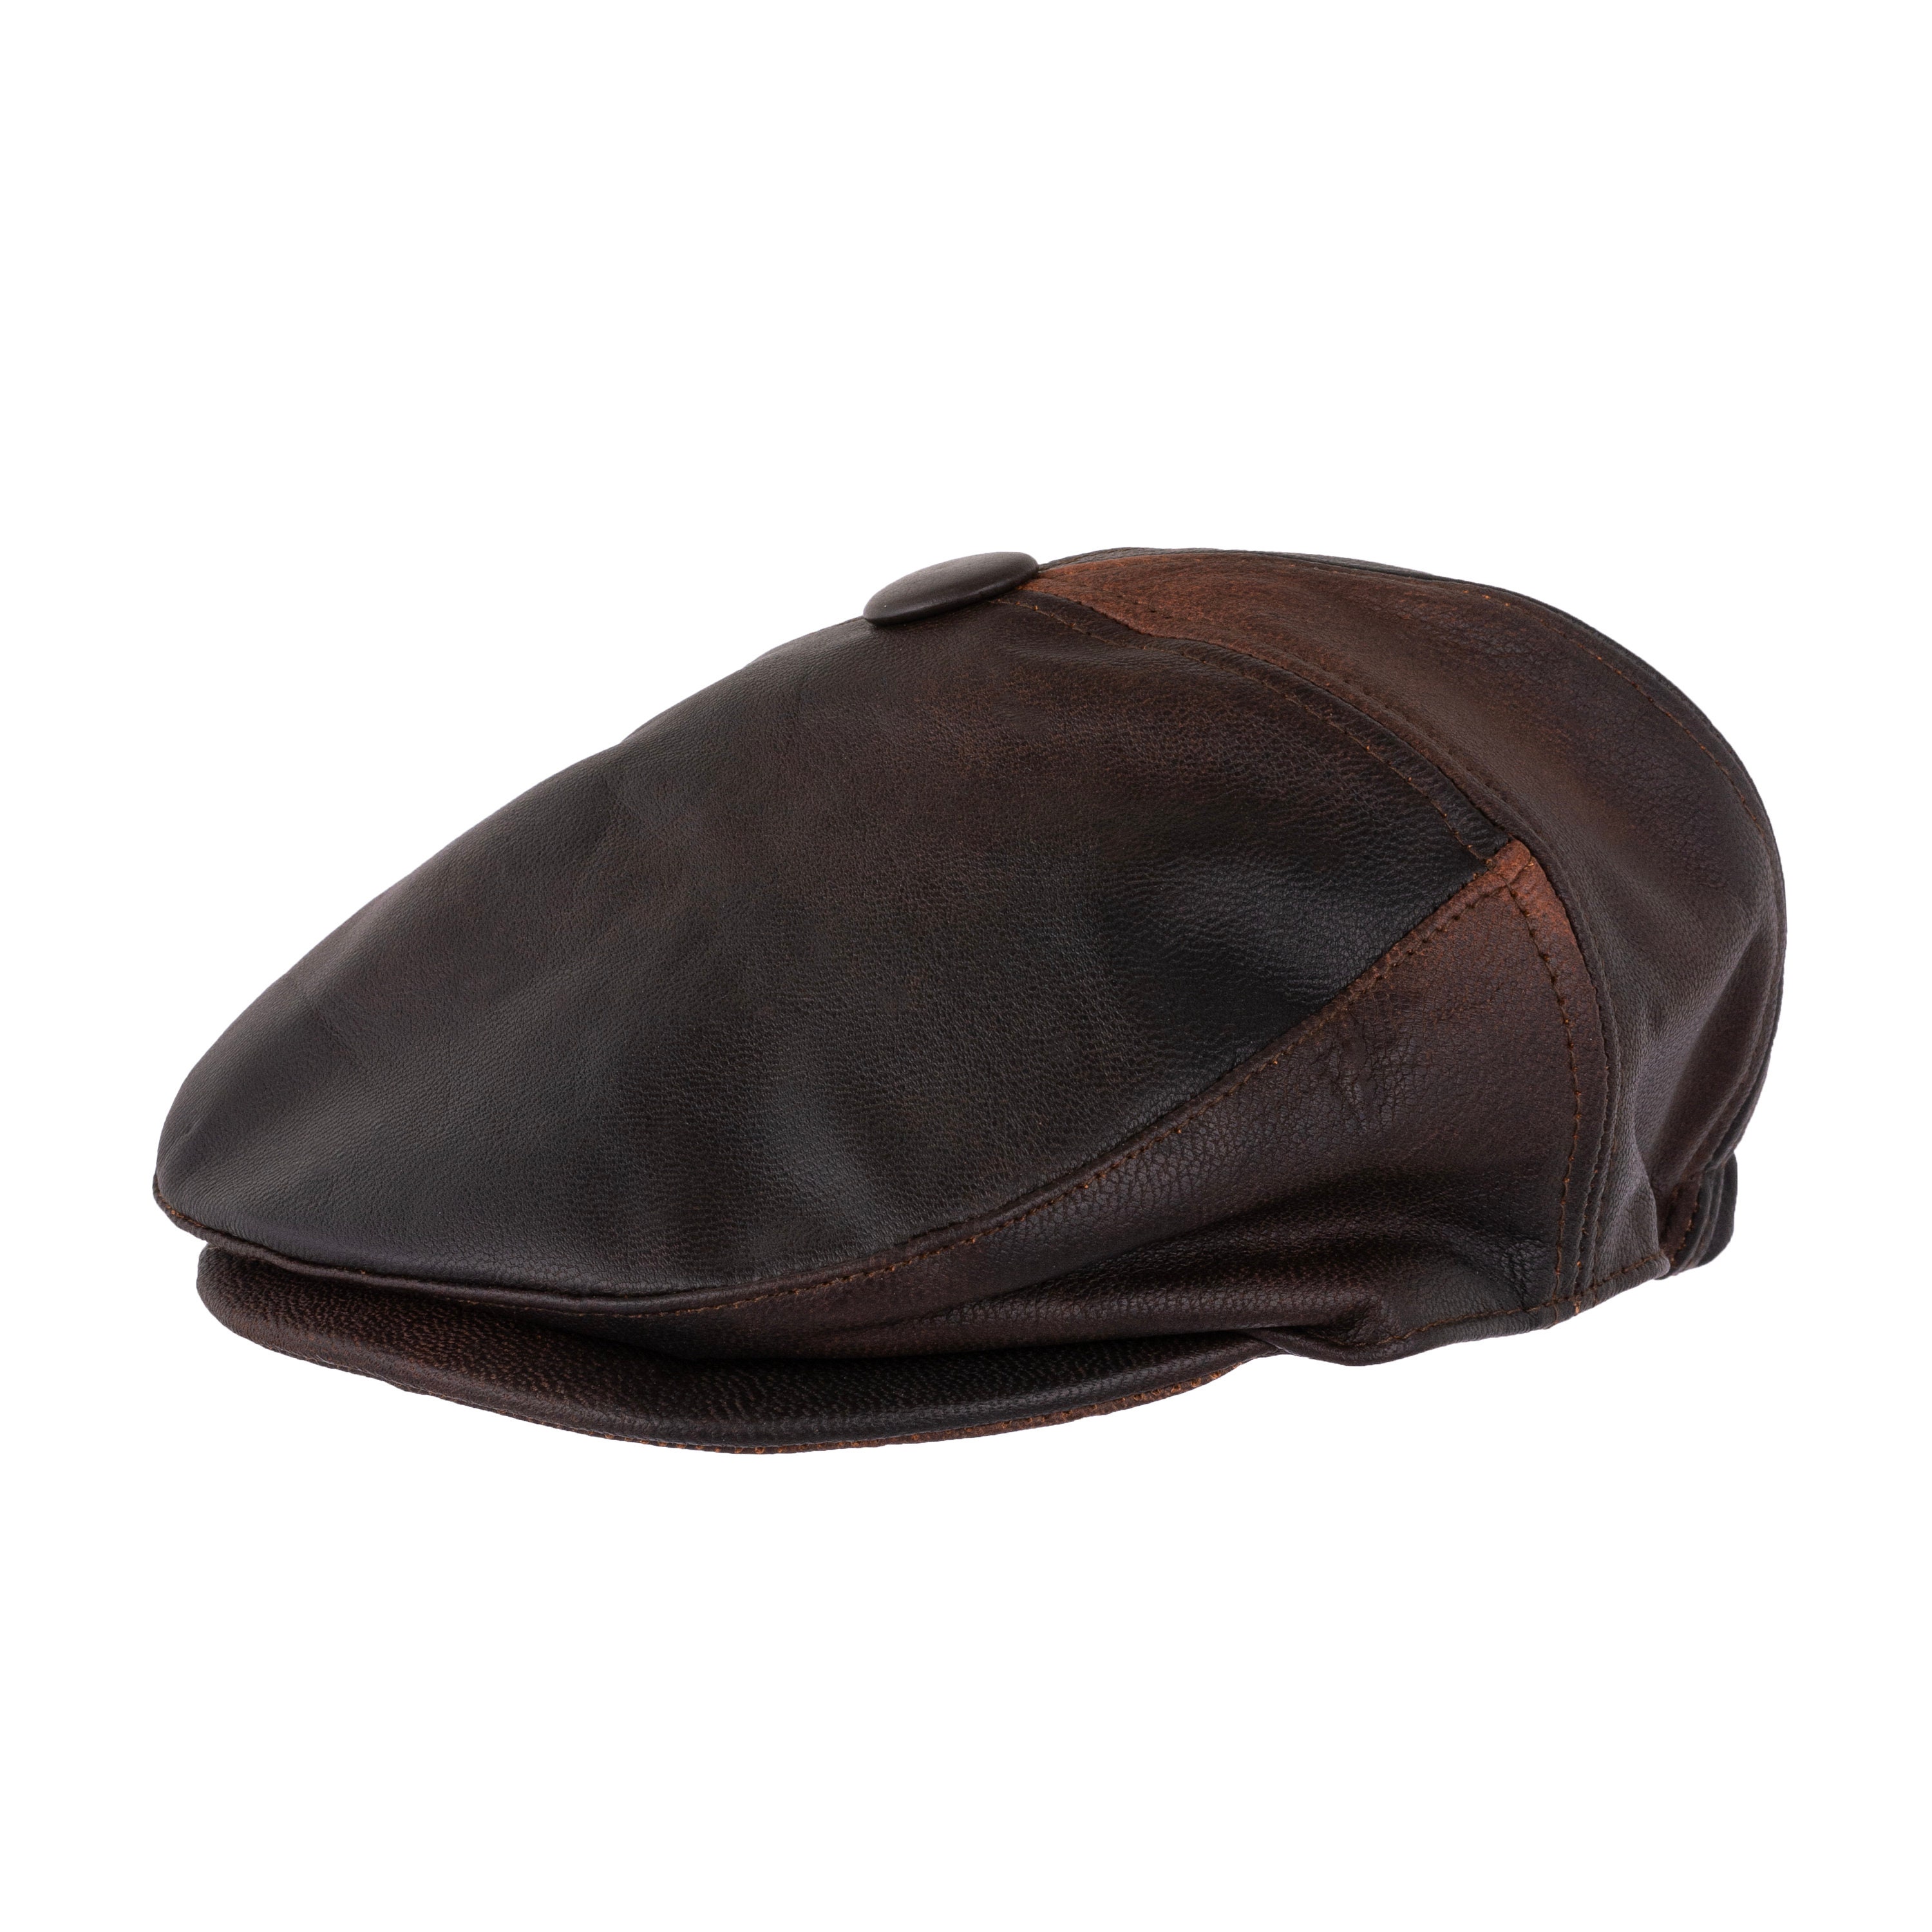 Handmade Brown Leather Newsboy Cap Handstitched Genuine Leather Ivy Cap  Leather Flat cap Classic Ivy Vintage Newsboy hat Christmas Gift